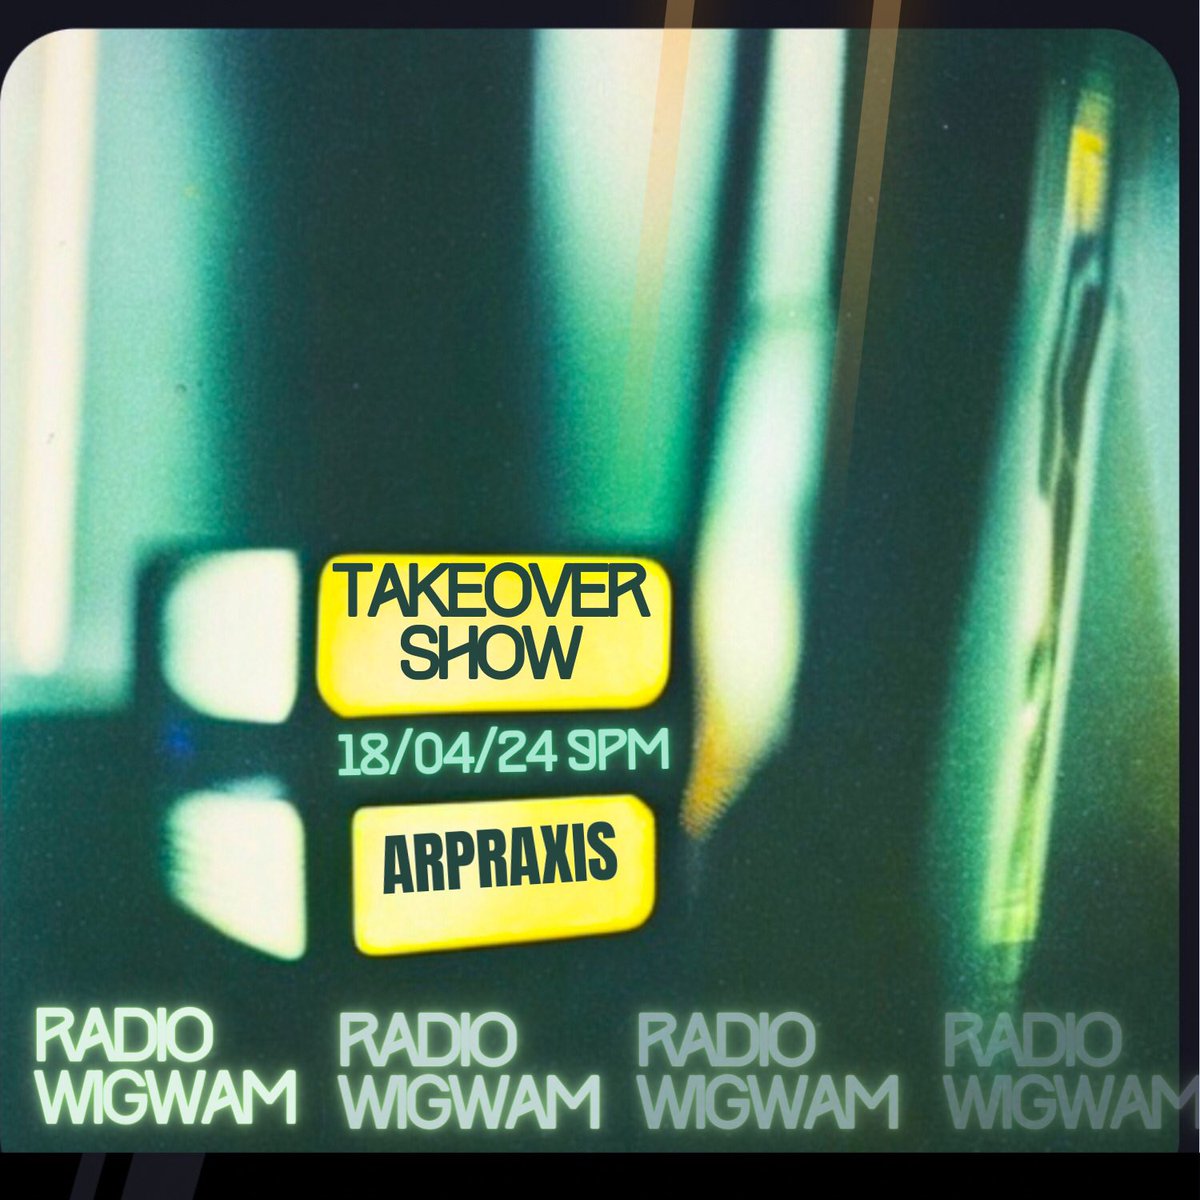 With 59 minutes of awesome #independentmusic get ready for the @Radio_WIGWAM takeover show! @SignalCommittee @belgraveroadrec @daveyhub @Shardlowe_ @brynovsky @zeropointprojx @MusicOfSoundUK @roguefxsynth @dilemmachine @mdonoghuemusic @LinearNorth @purplejag Crybaby #radioshow